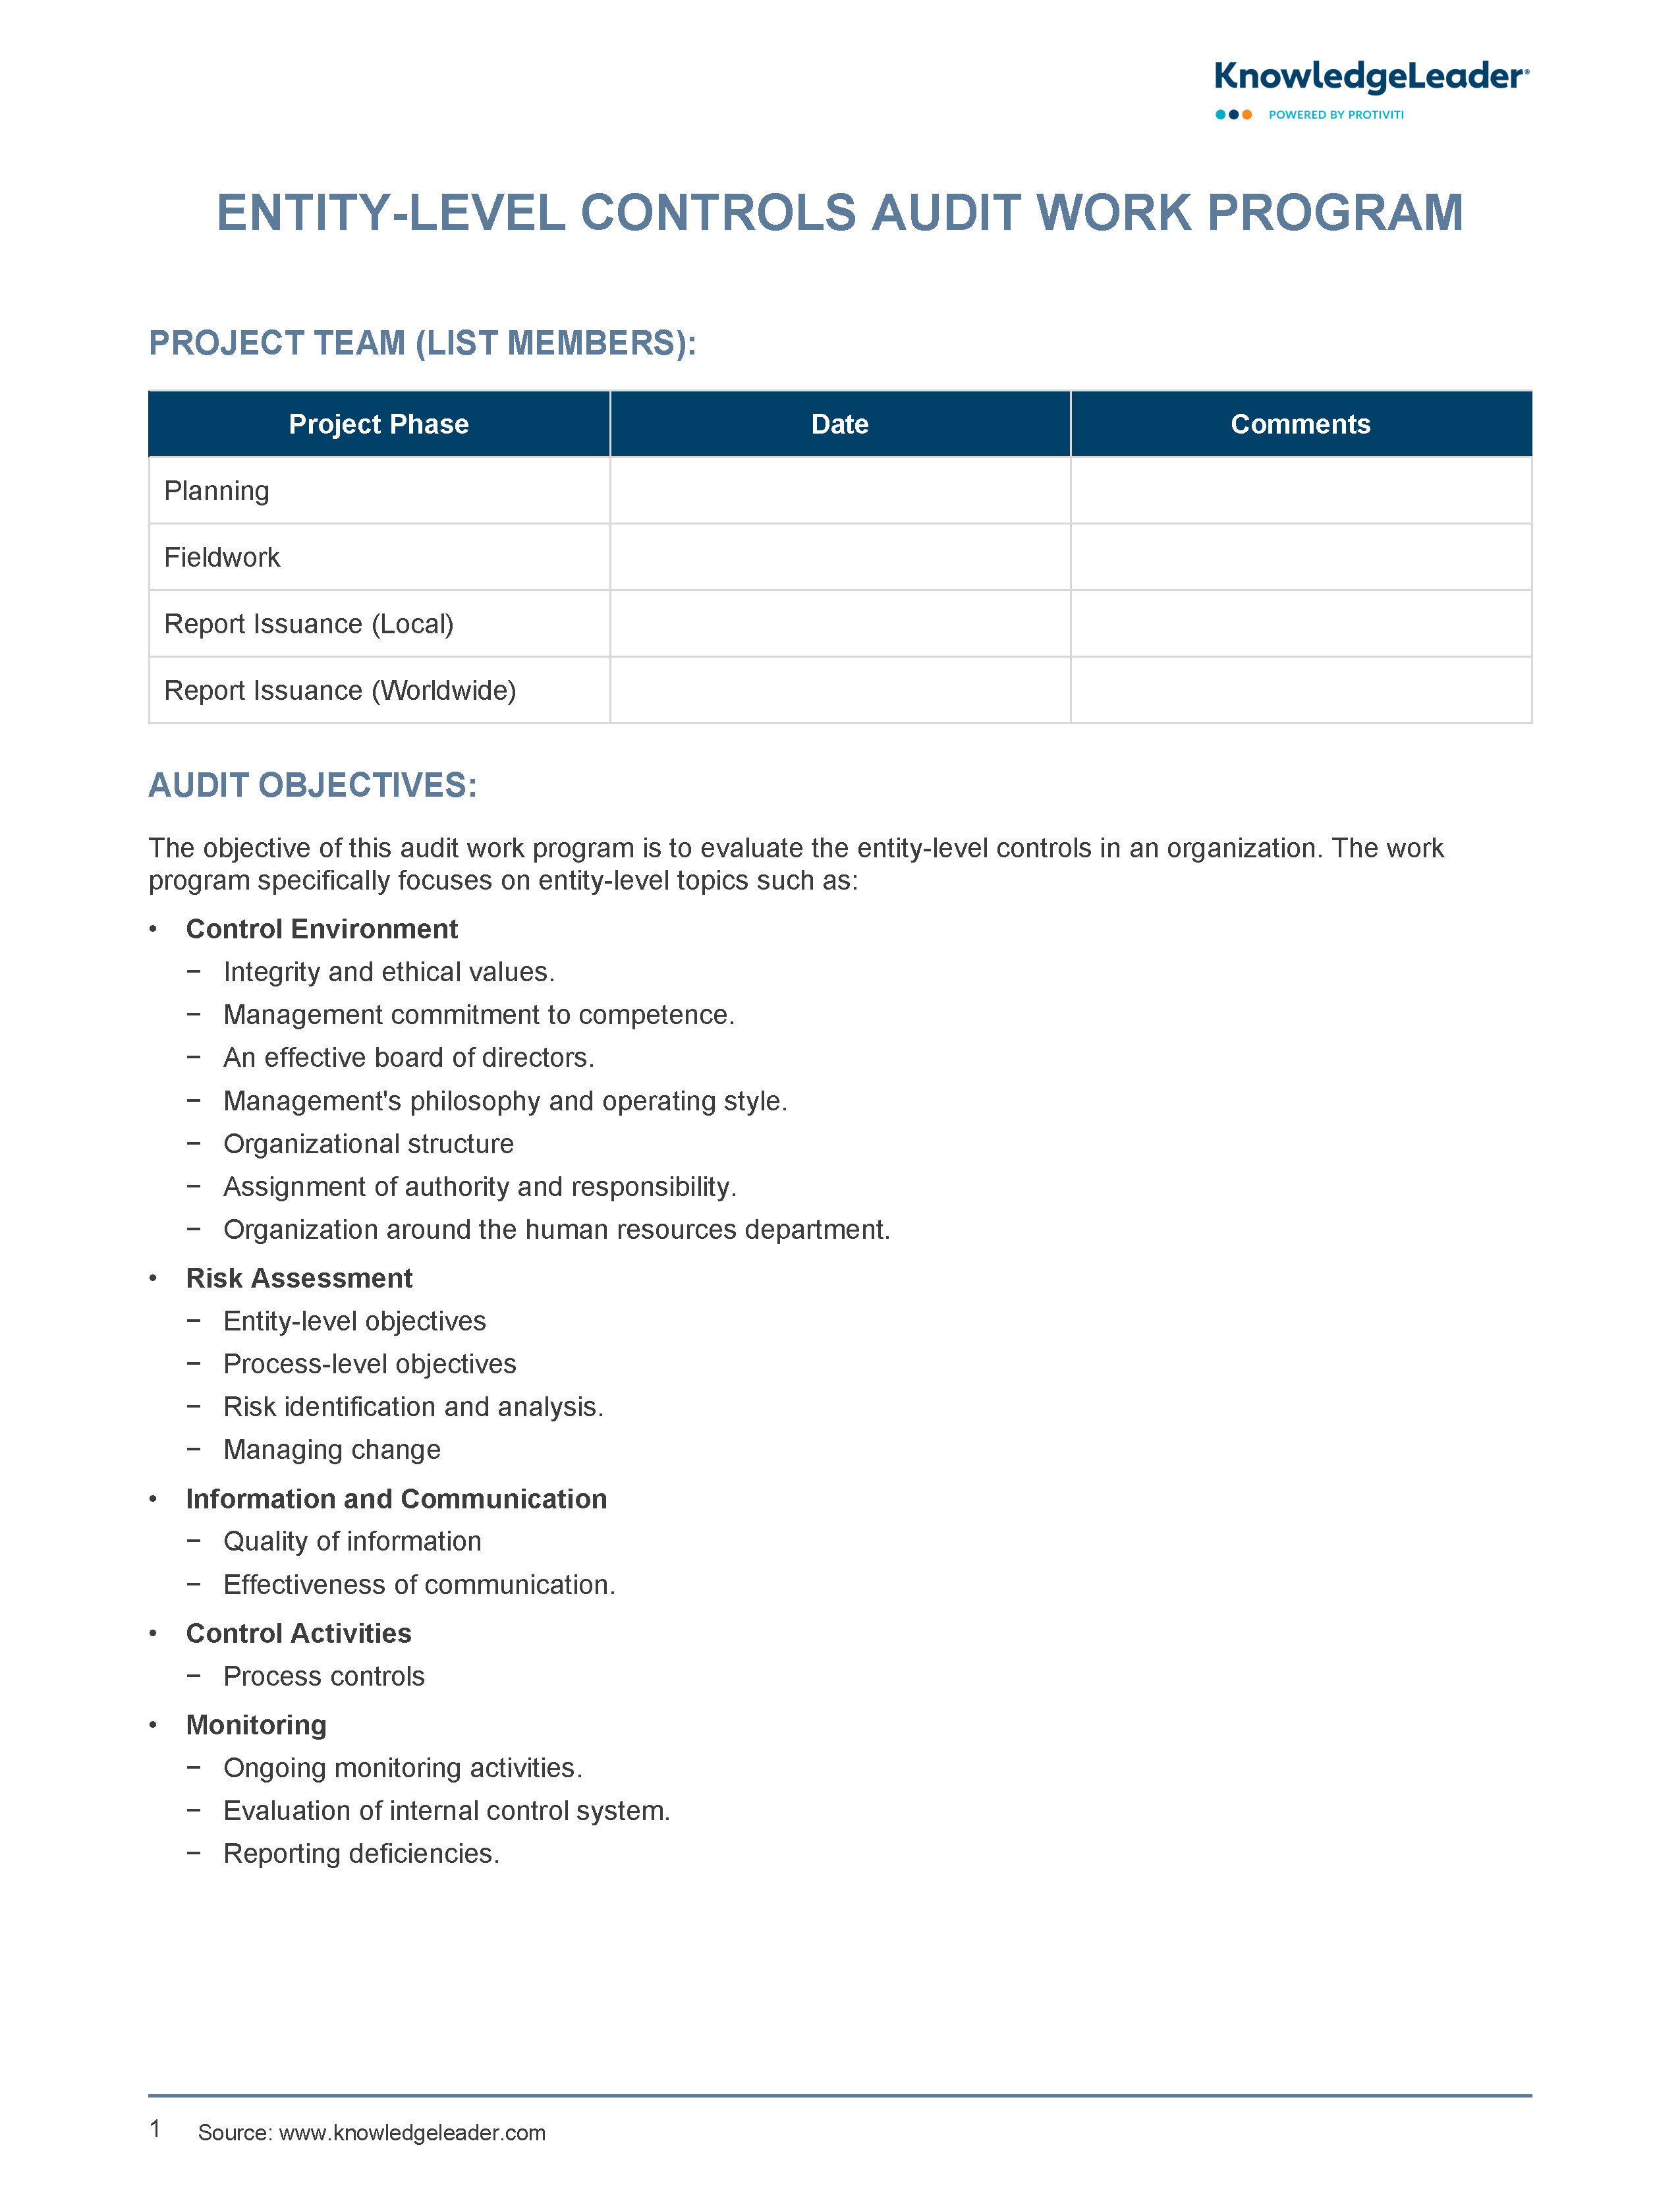 Screenshot of the first page of Entity-Level Controls Audit Work Program